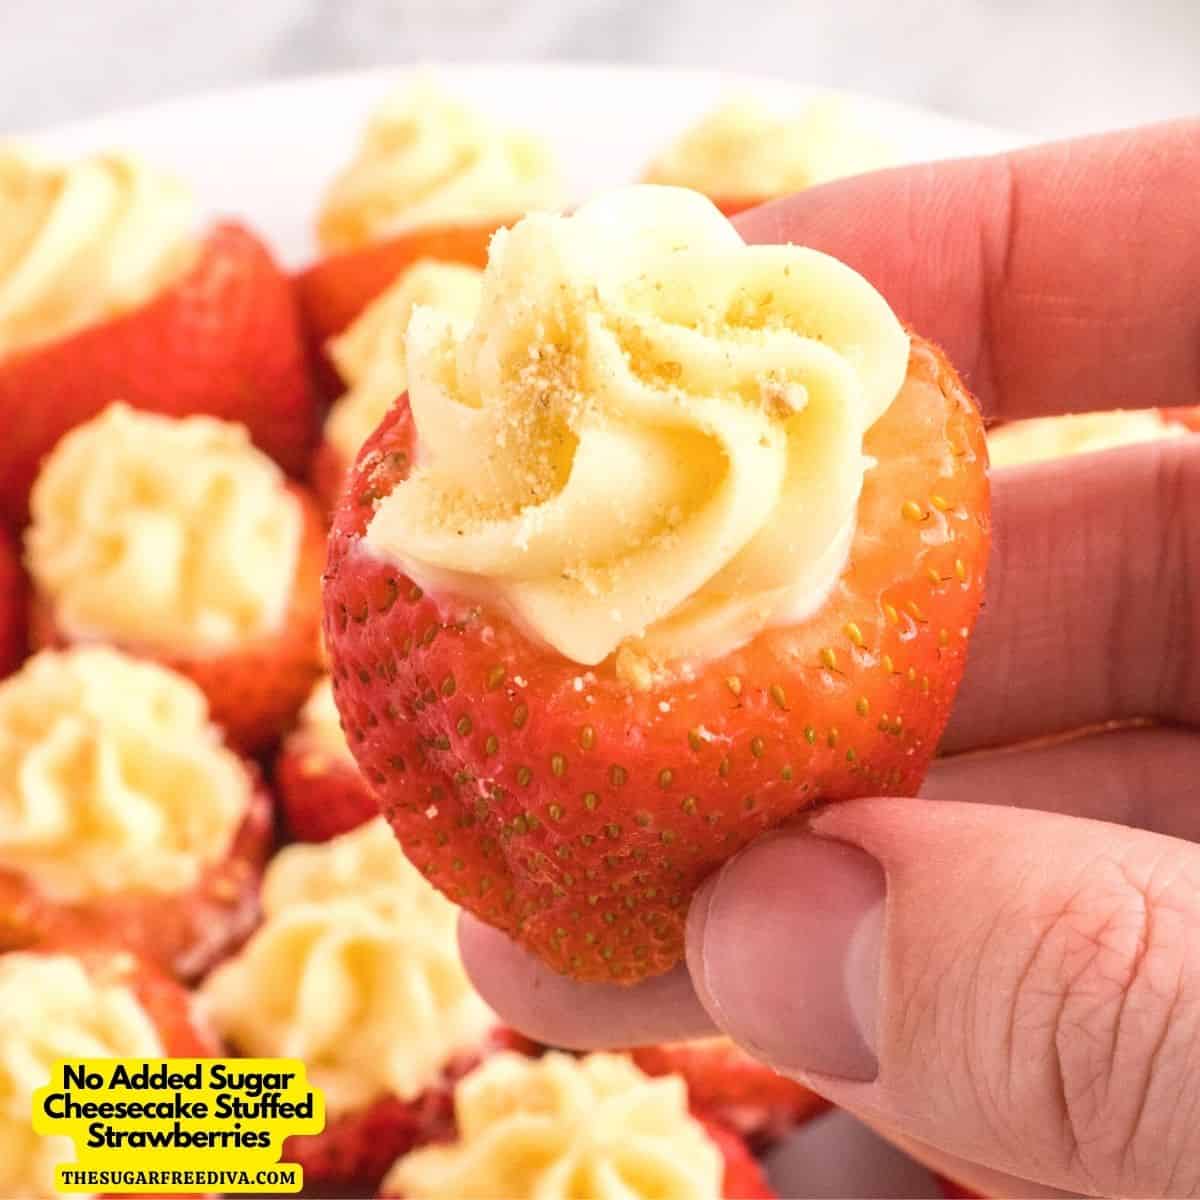 No Added Sugar Cheesecake Stuffed Strawberries, a quick and easy no bake dessert or snack recipe made with no added sugar